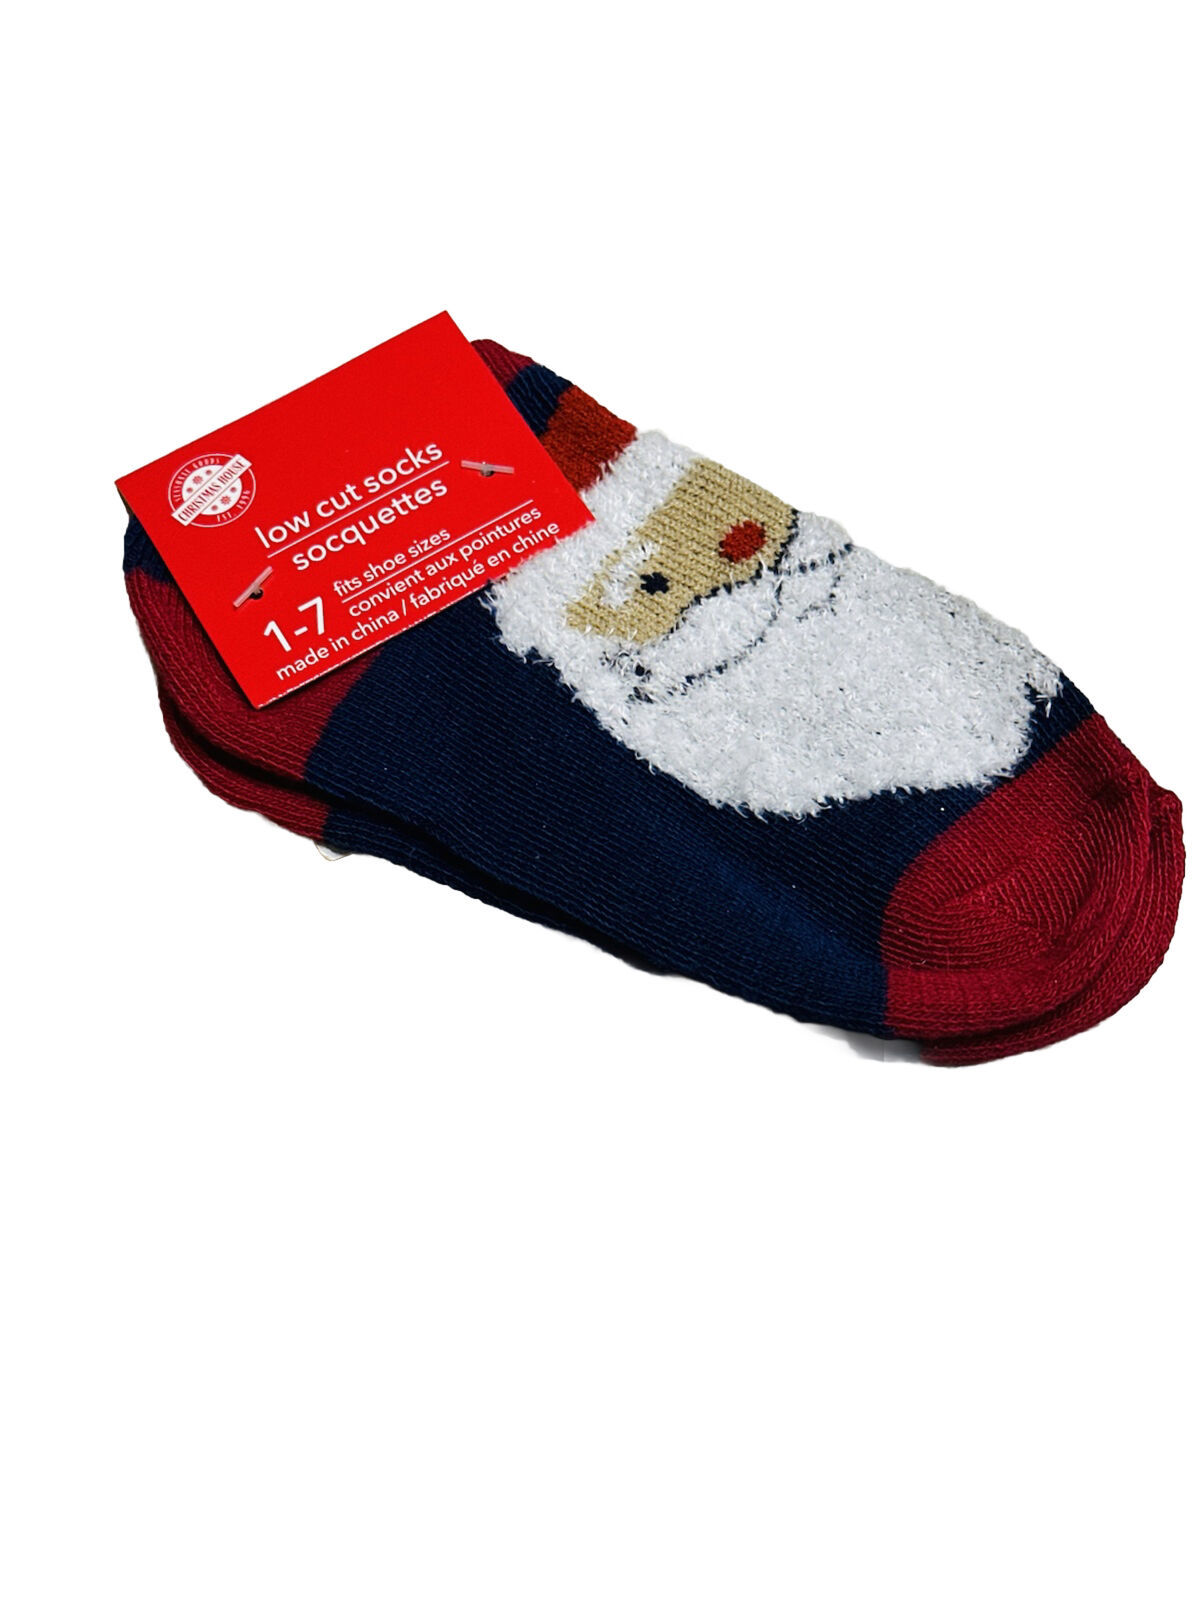 Primary image for Christmas House - Santa Claus Socks - Kid's Size 1-7- Low Cut Socks